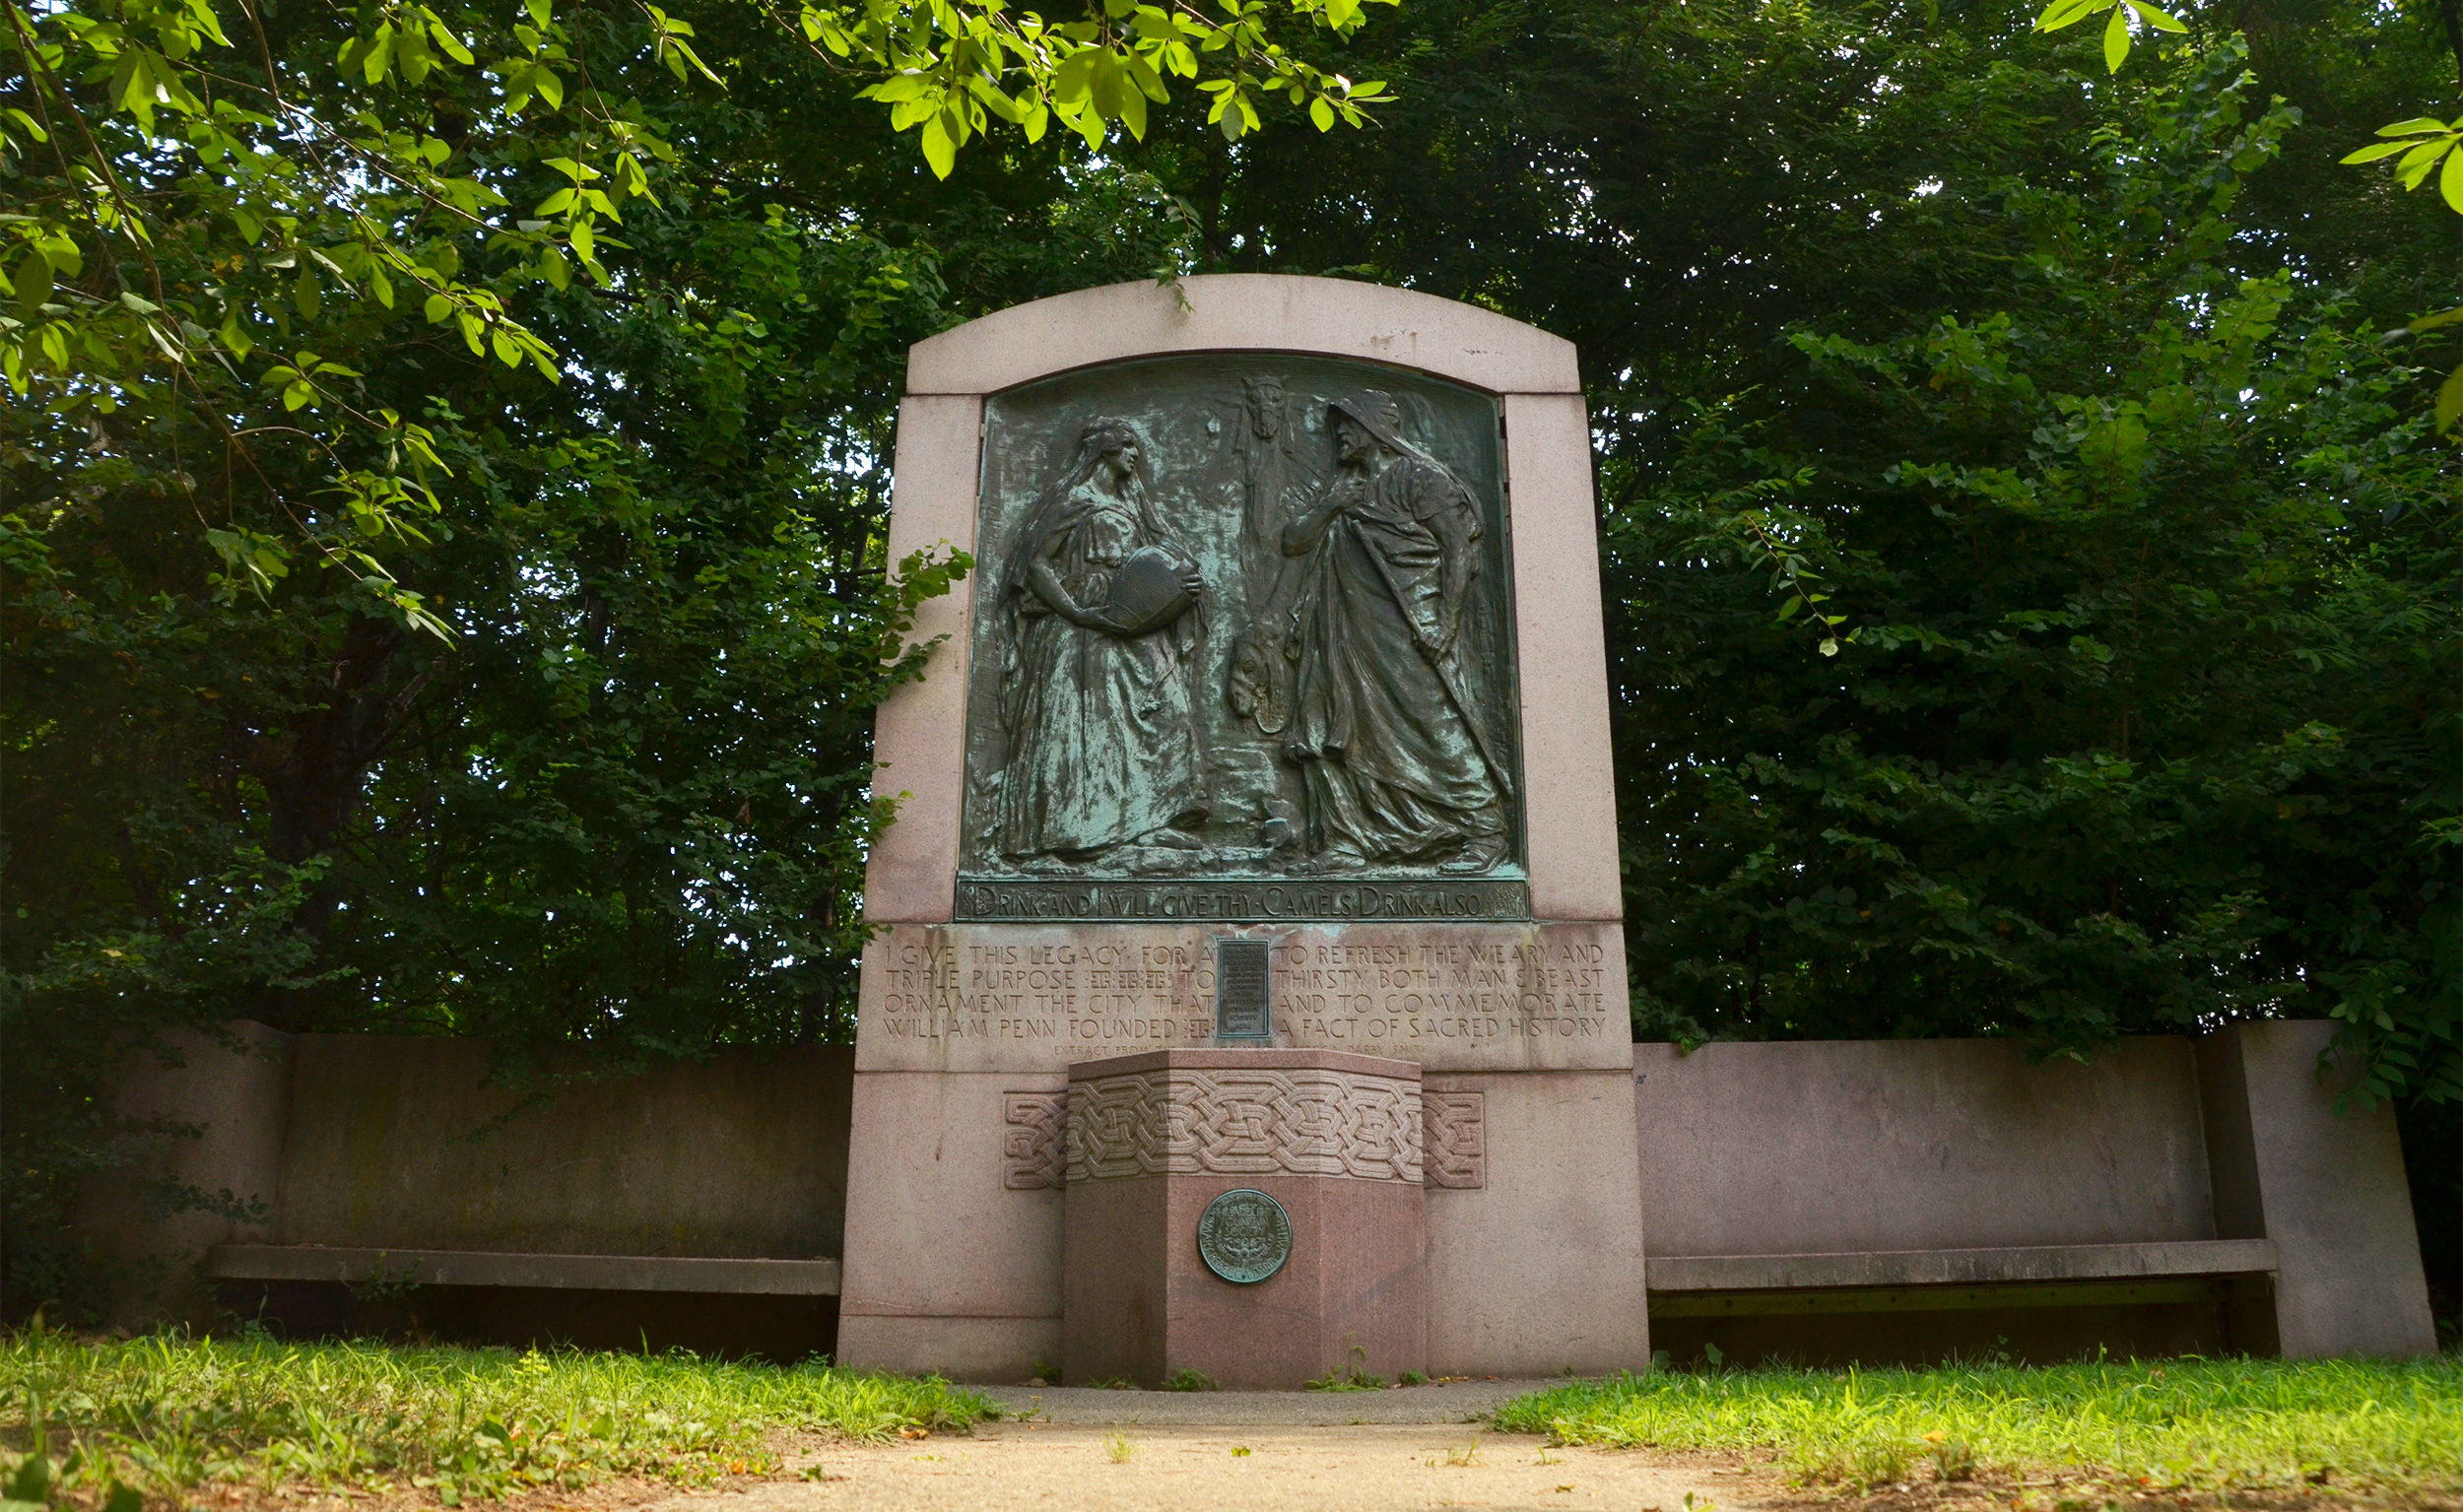 Full view of the weathered bronze relief in Fairmount Park that depicts a biblical scene: Rebecca offering water to a man and his camel. The bronze relief is set in a granite structure with seating and an old water fountain.